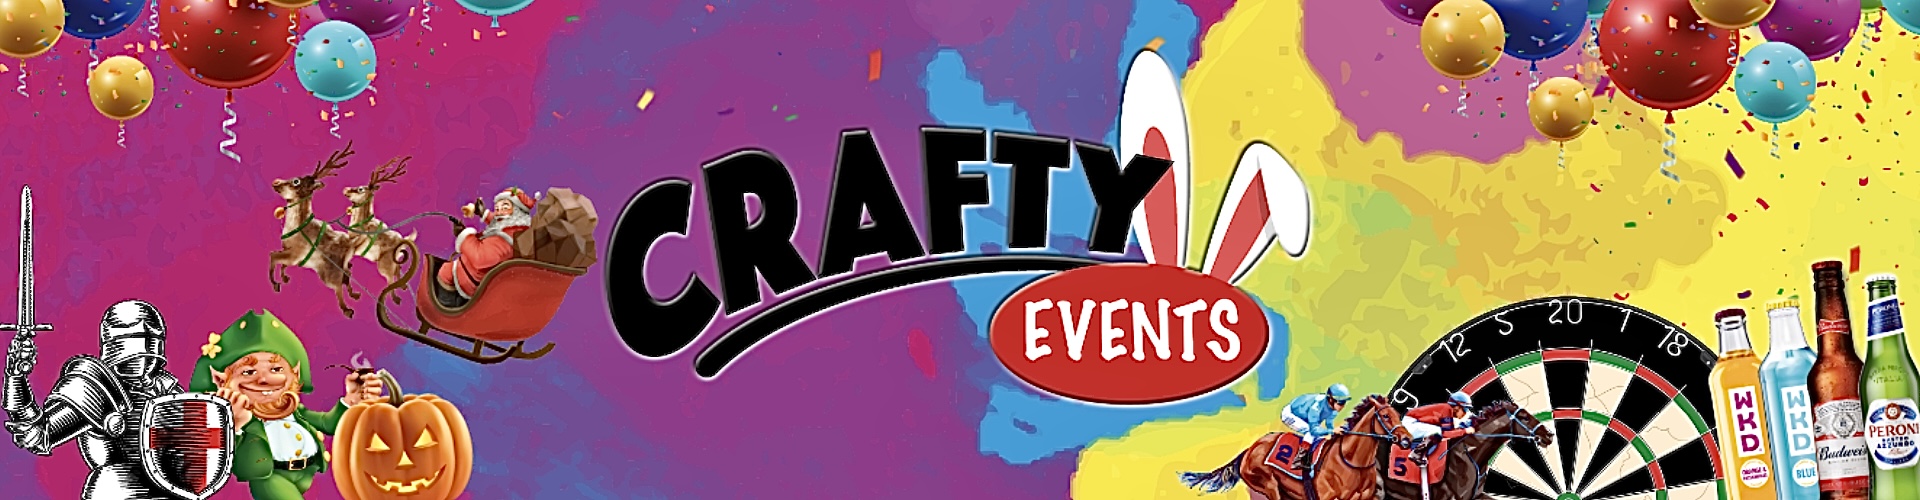 Crafty Events